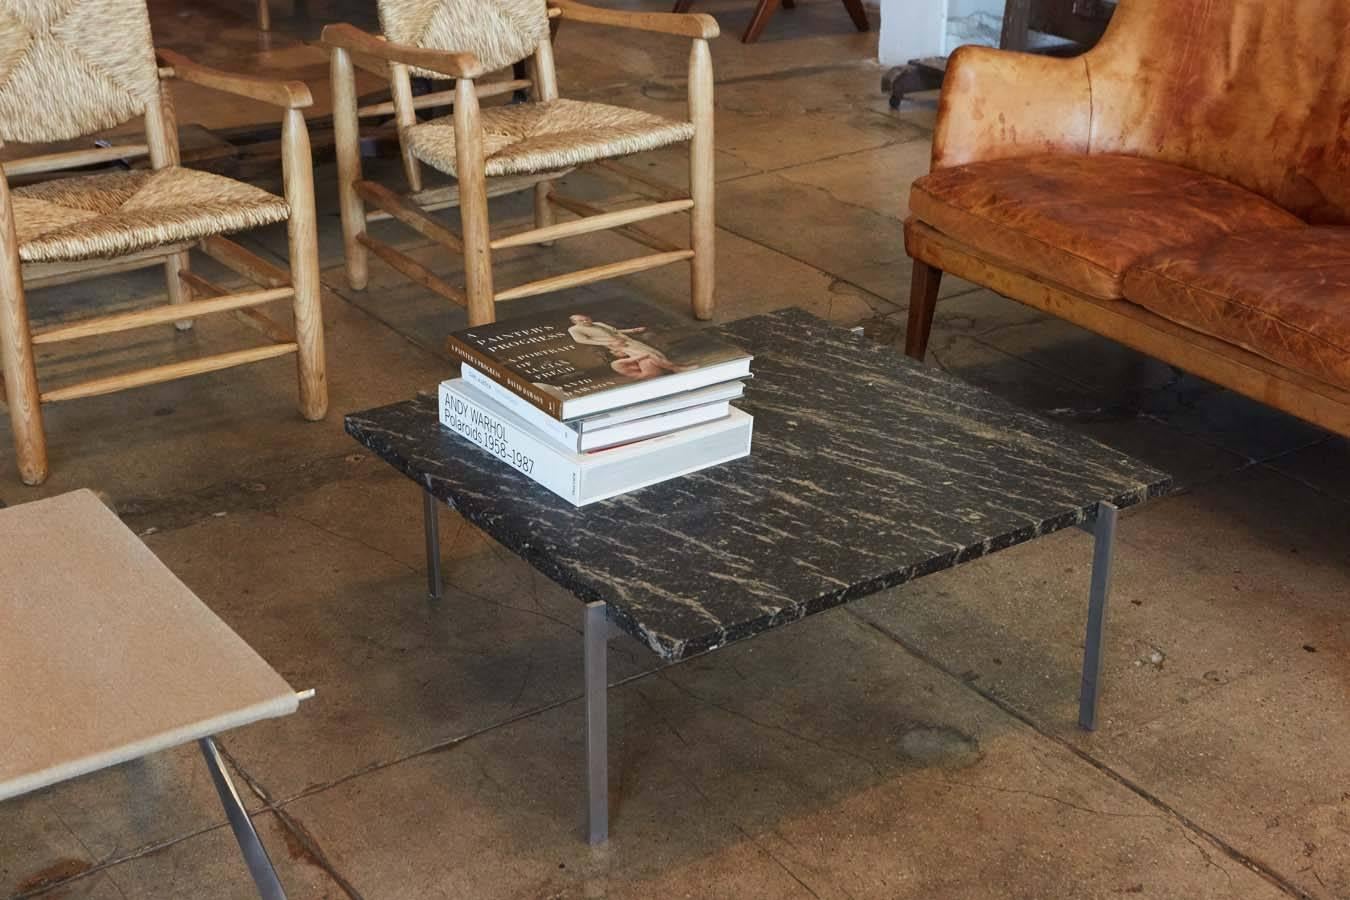 PK61 coffee table produced and stamped by E. Kold Christensen.